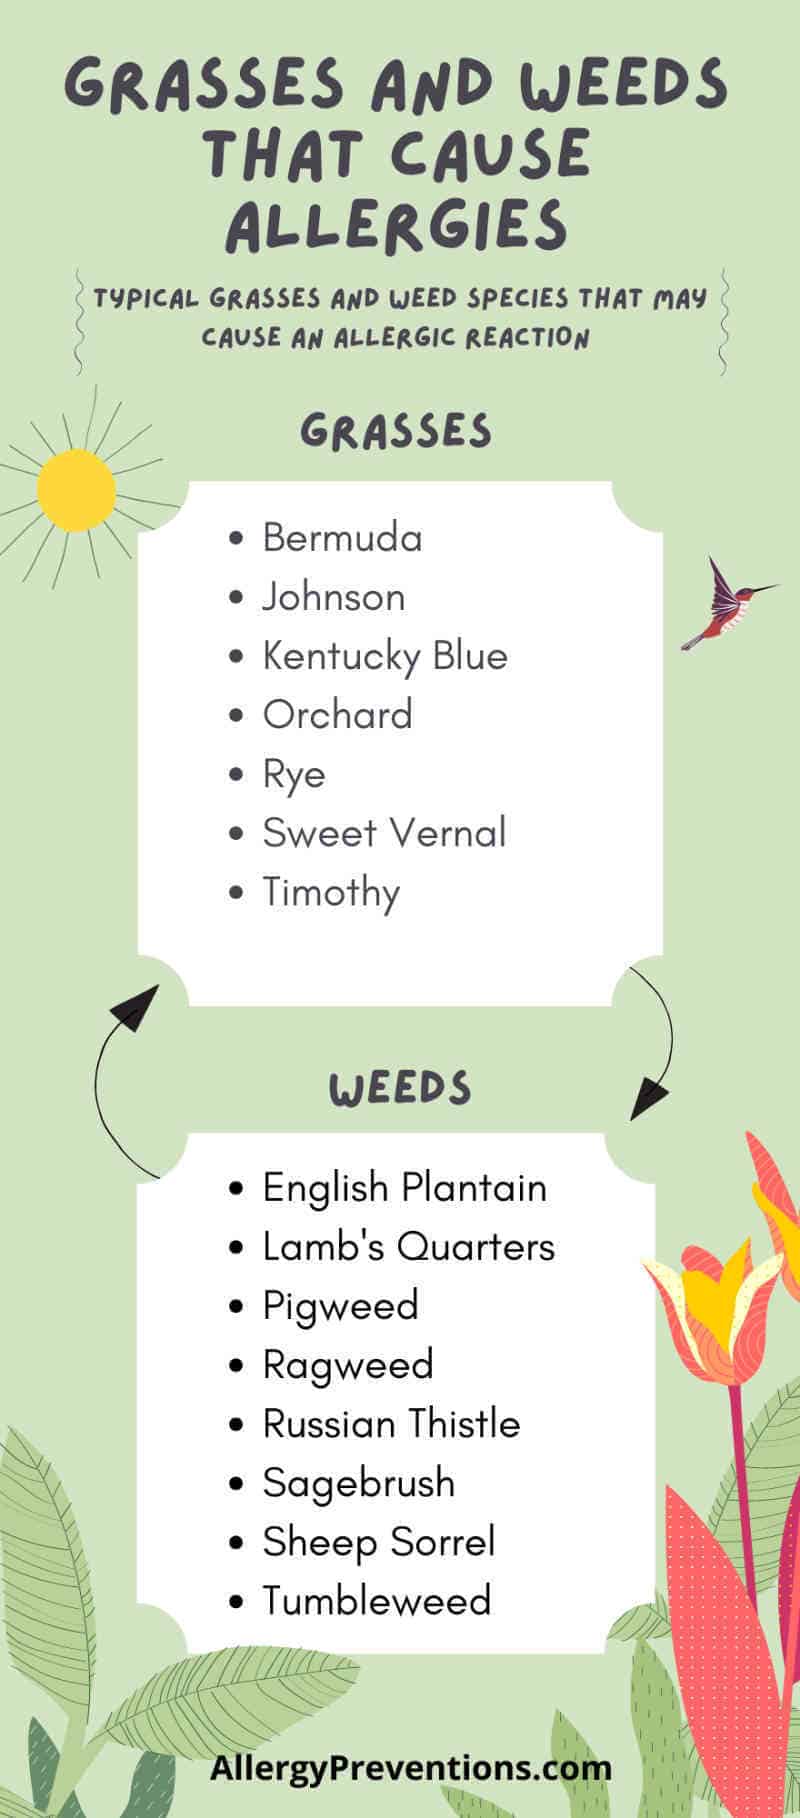 infographic on grasses and weeds that cause allergies. The most common grasses to cause allergy symptoms are: Bermuda, Johnson, Kentucky Blue, Orchard, Rye, Sweet Vernal, and Timothy. Weeds that cause allergic reaction: English Plantain, Lamb's Quarters, Pigweed, Ragweed, Russian Thistle, Sagebrush, Sheep Sorrel, Tumbleweed